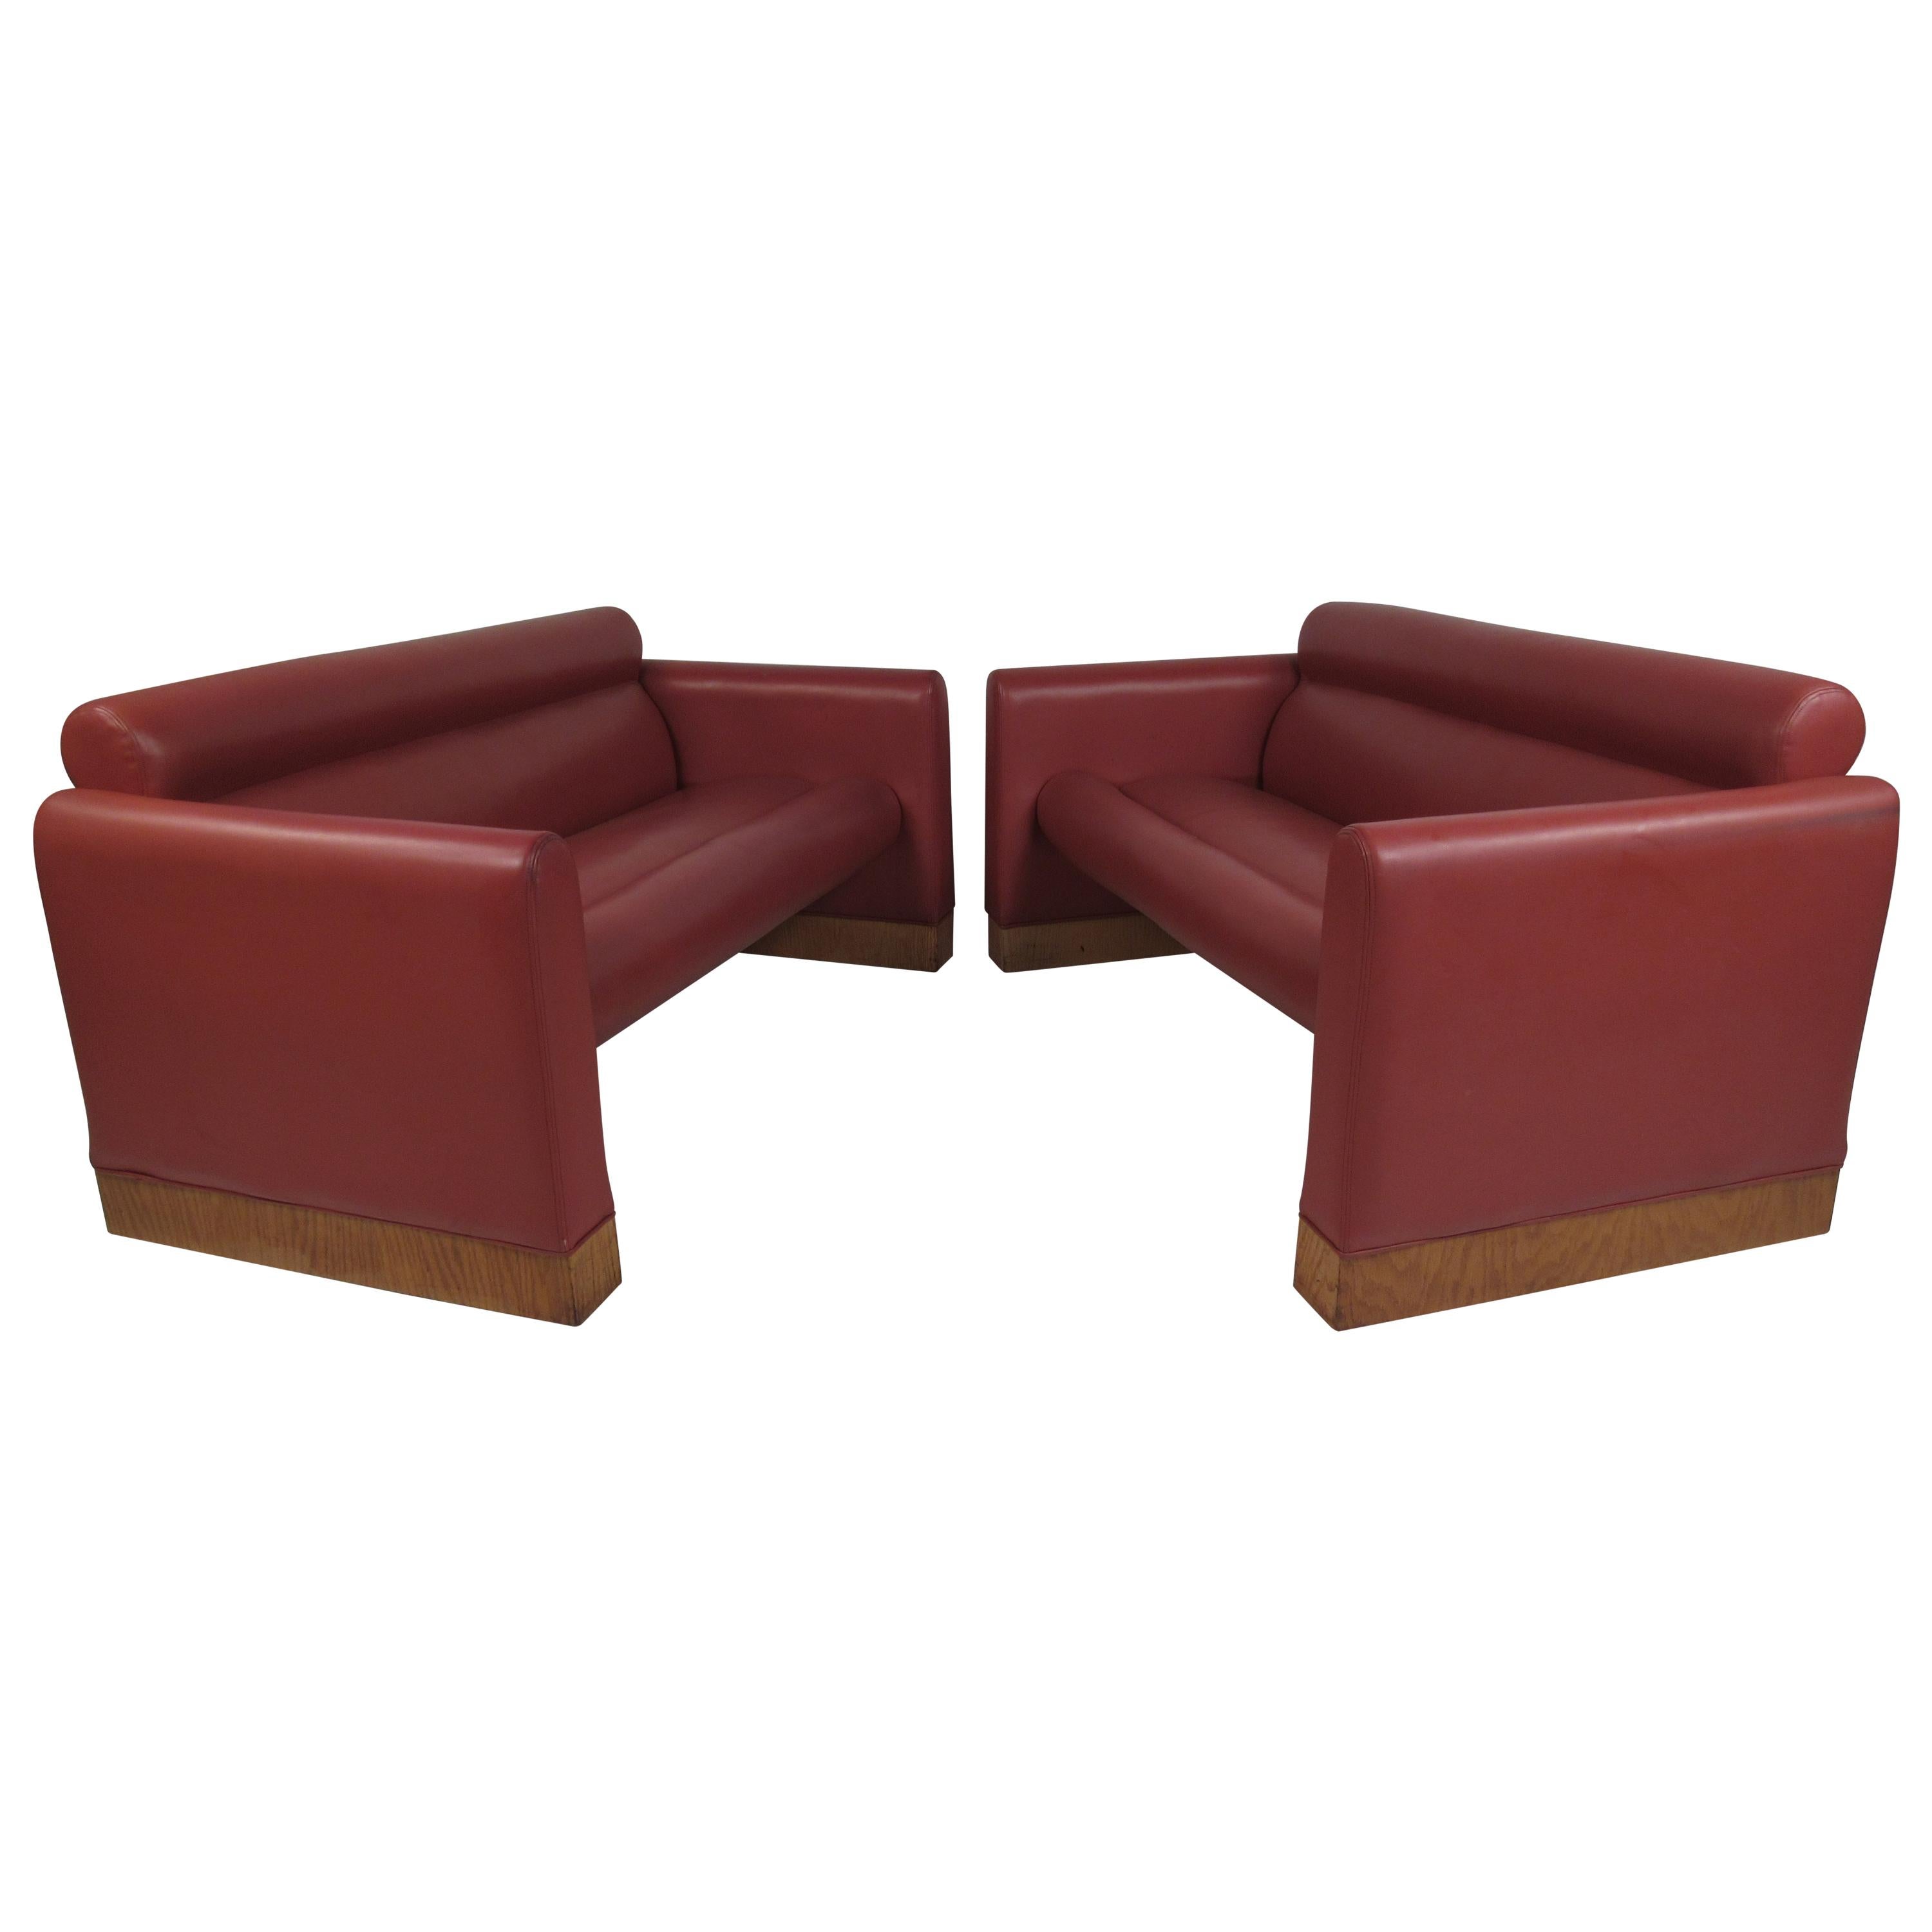 Pair of Midcentury Settee's by Charlotte Chair Company